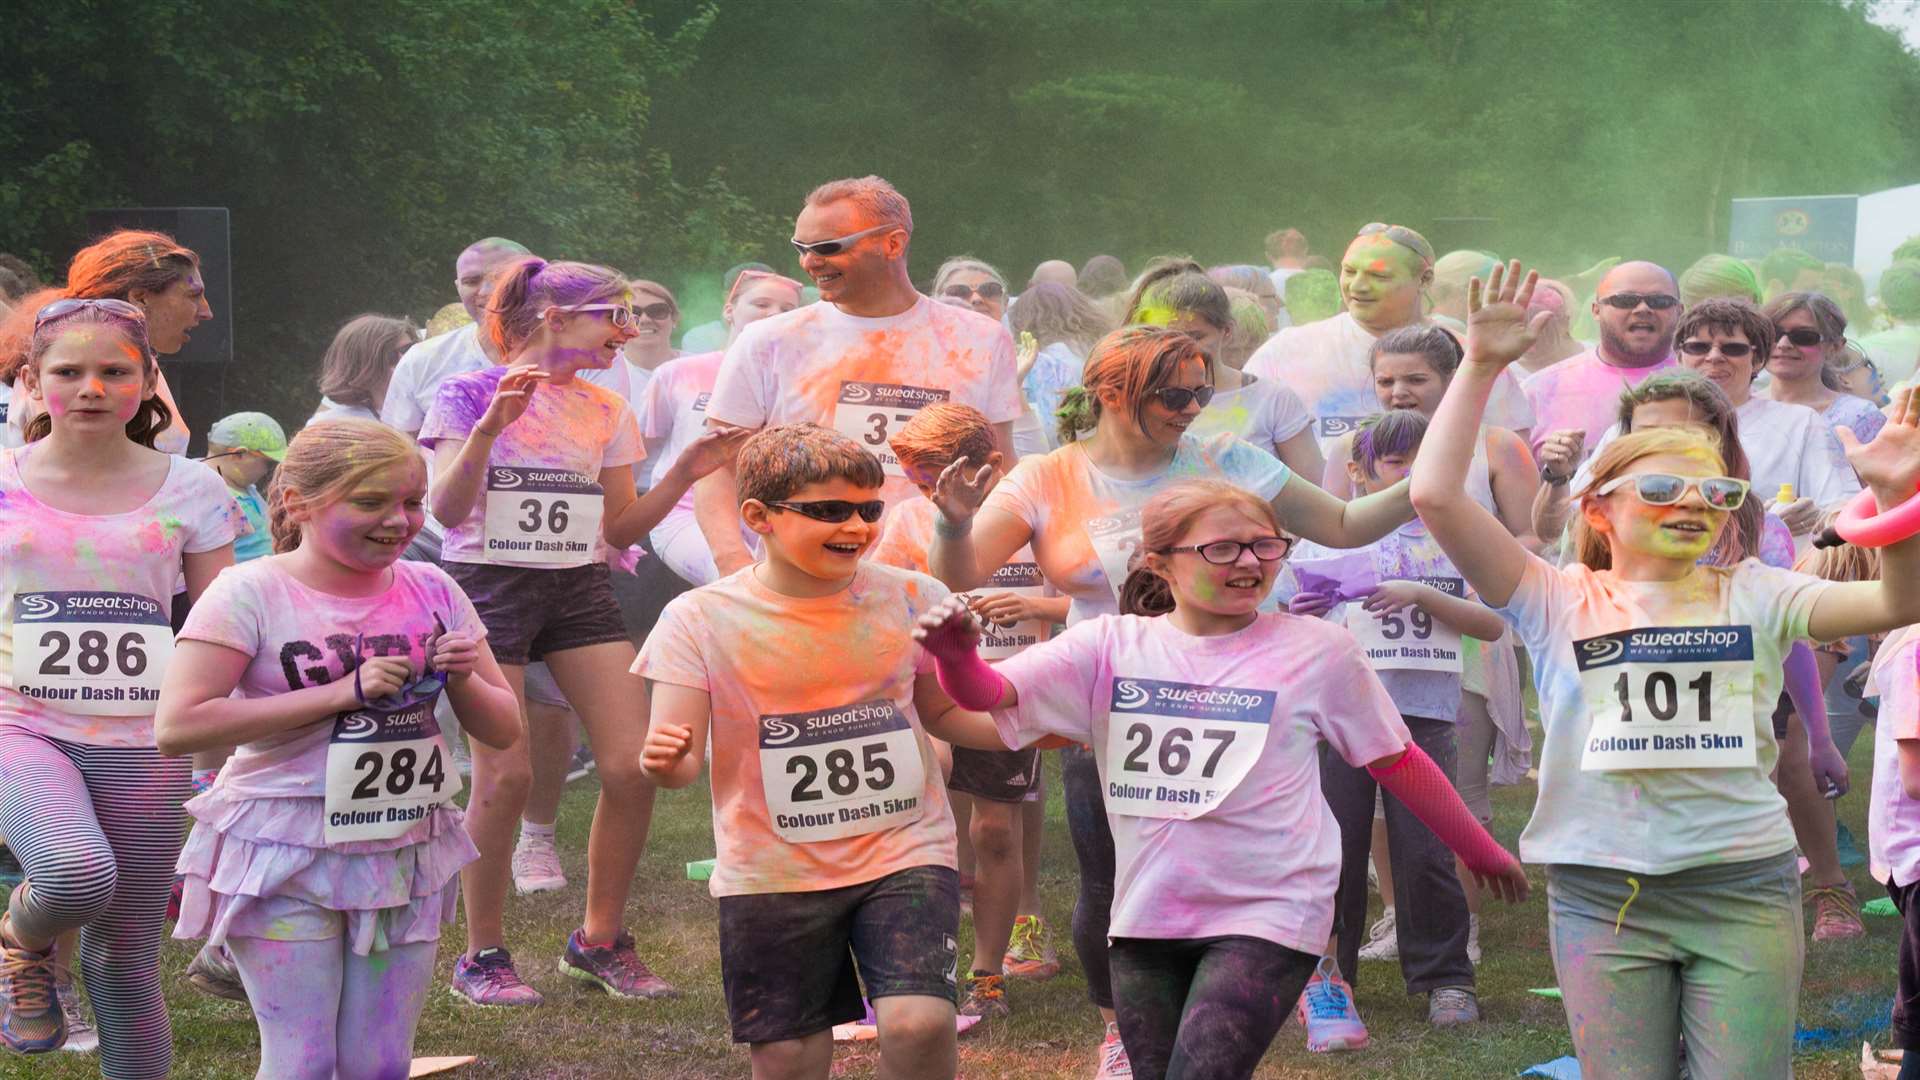 Last year's Colour Dash was a great success.